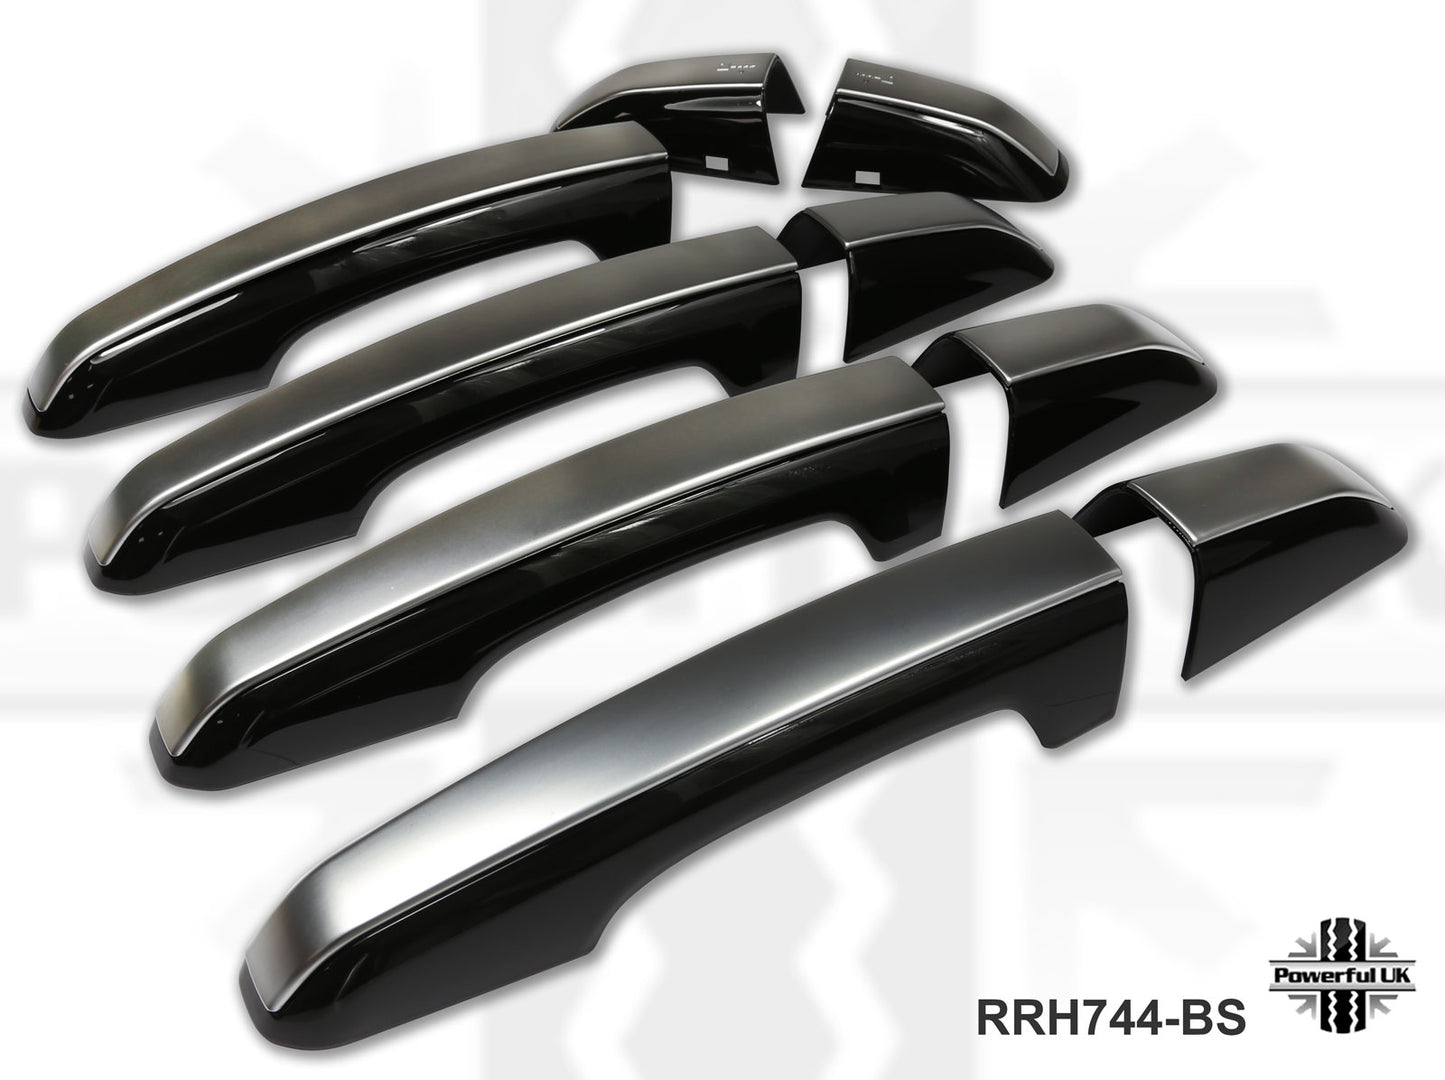 2pc "Autobiography Style" Door Handle Covers for Range Rover Evoque L538 - Black/Silver